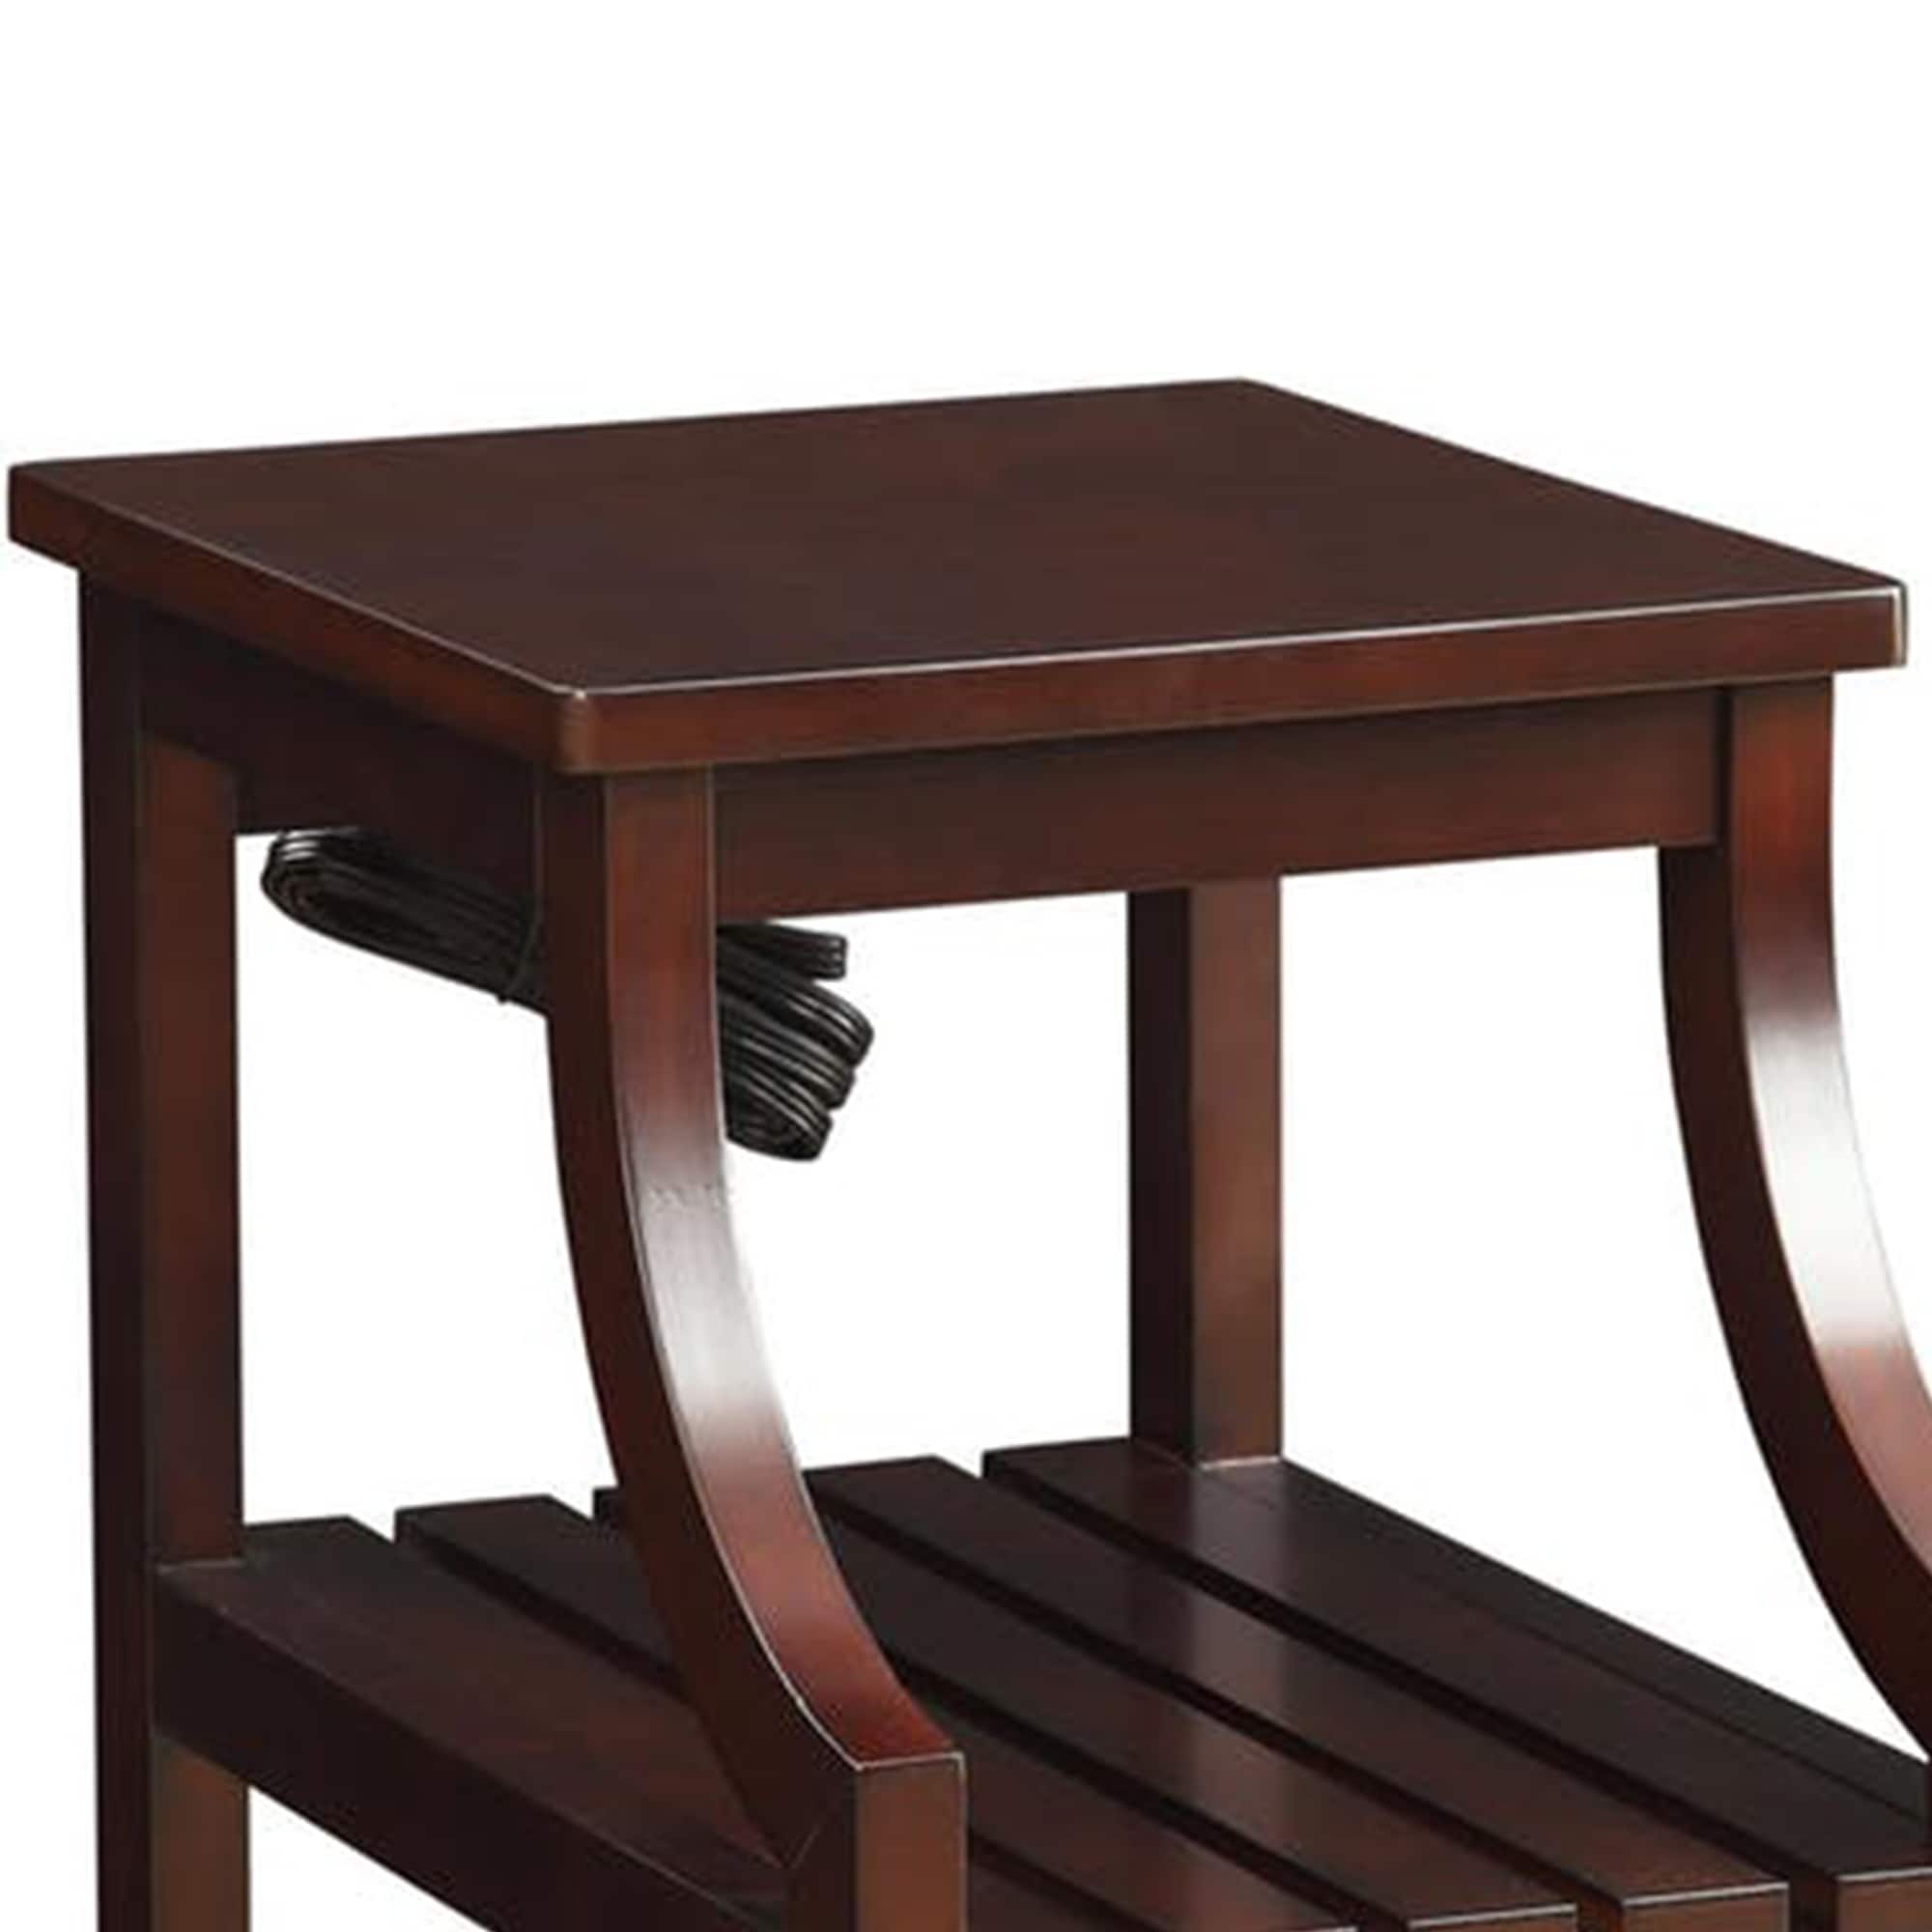 Benzara 20 In W X 24 In H Brown Wood Modern End Table With Storage Assembly Required In The End